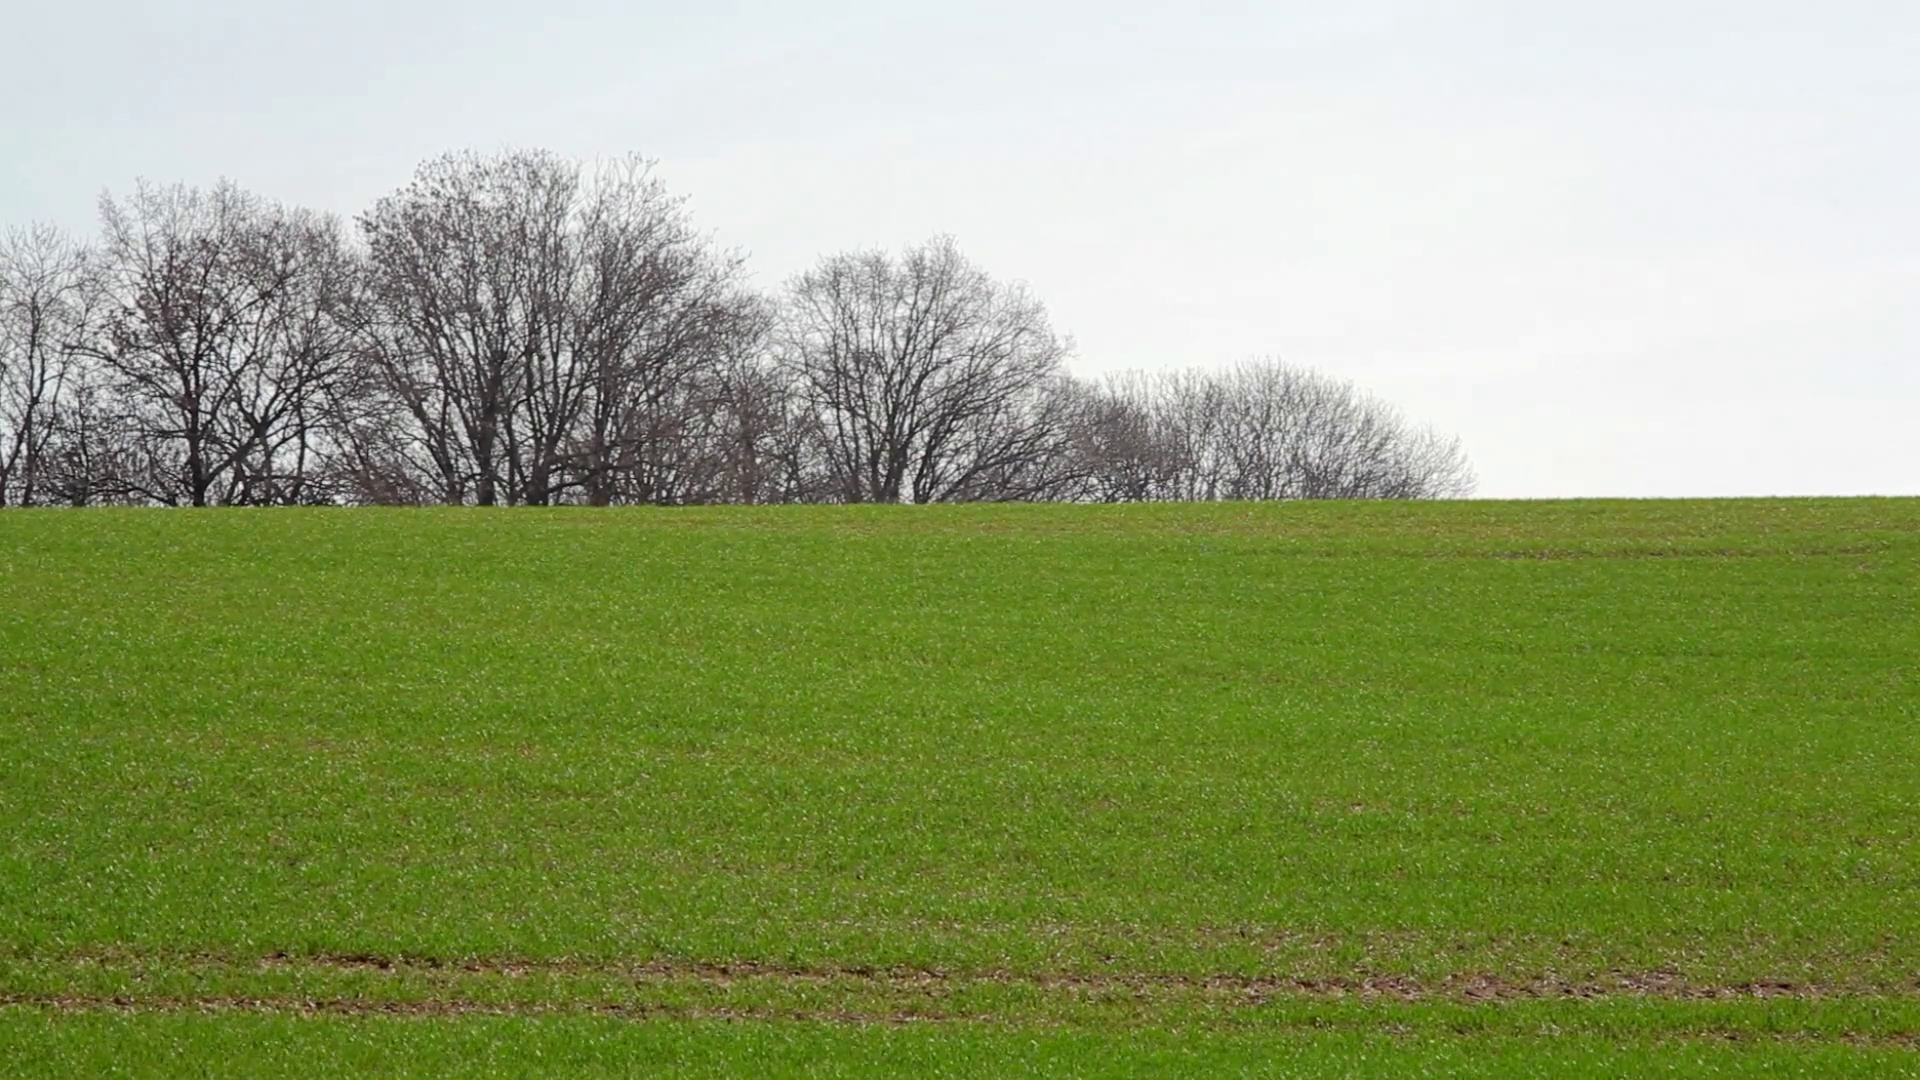 Green rolling hill grass field, trees in background, winter, Germany ...